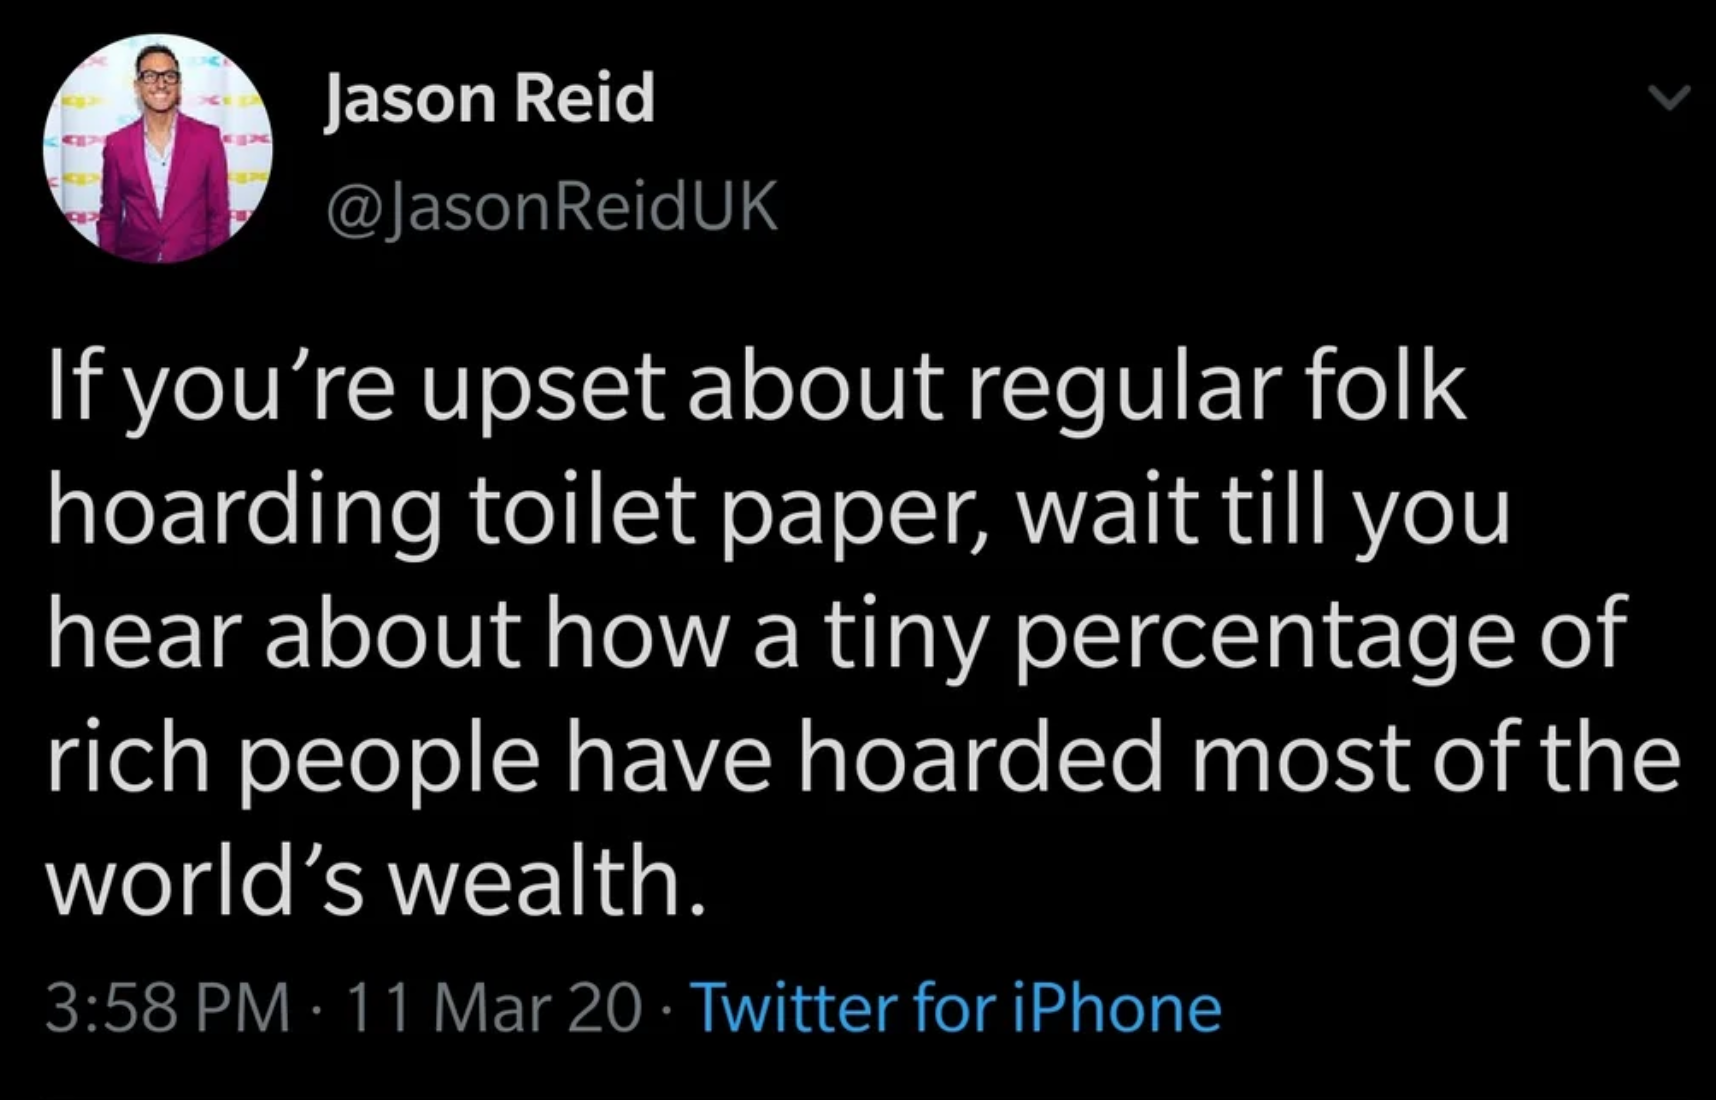 light - Jason Reid If you're upset about regular folk hoarding toilet paper, wait till you hear about how a tiny percentage of rich people have hoarded most of the world's wealth. 11 Mar 20 Twitter for iPhone